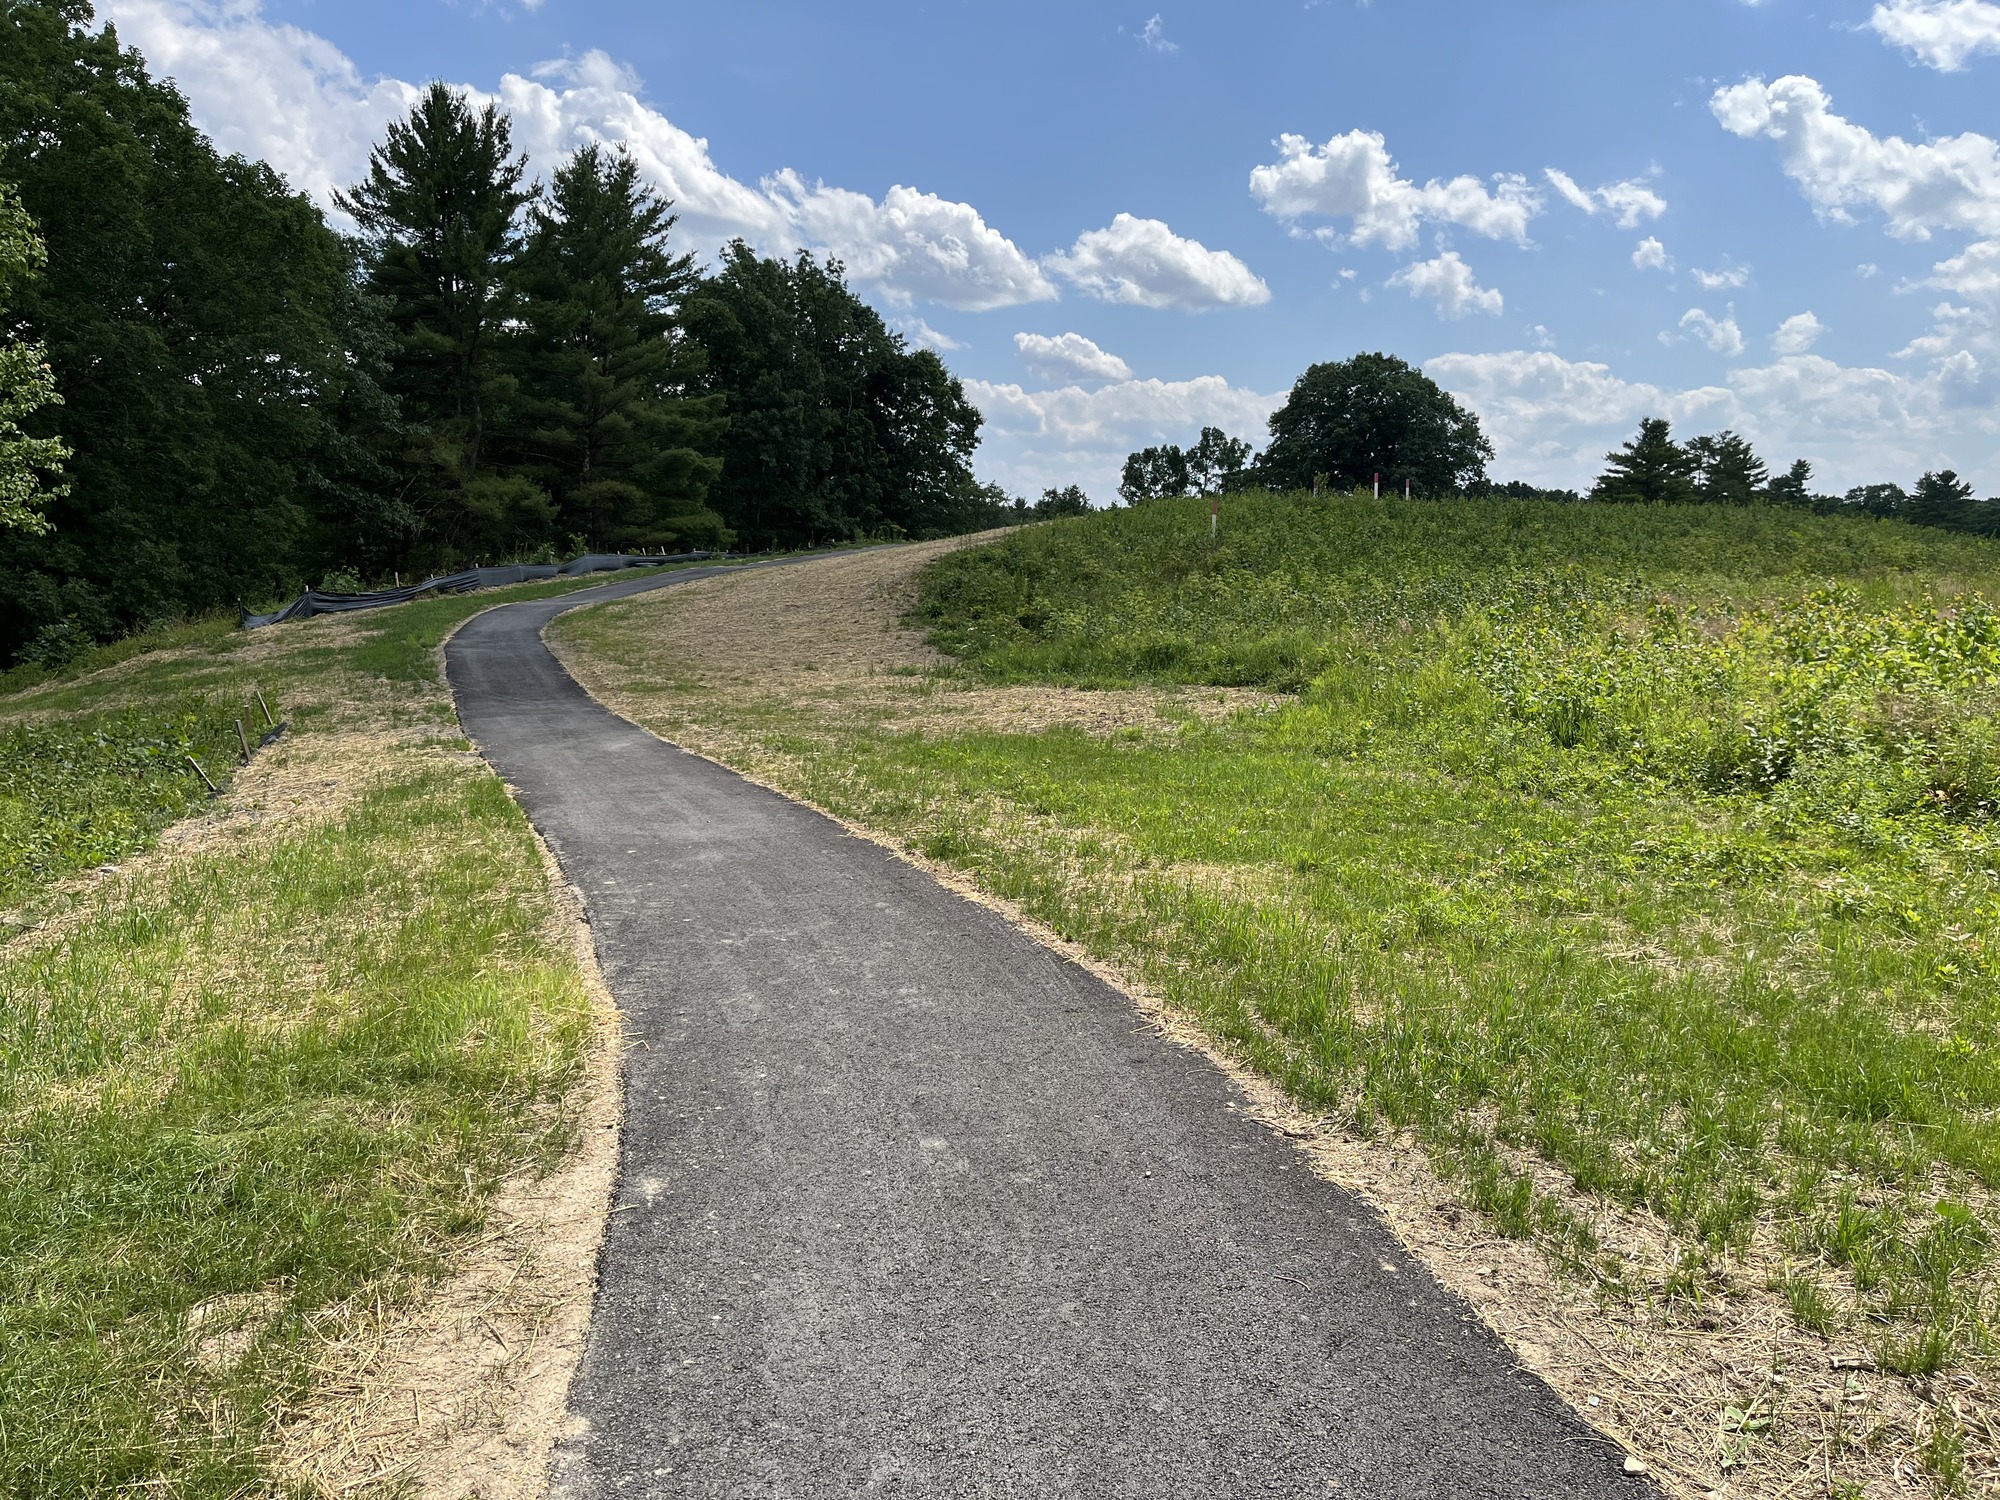 A blacktop path meanders from center foreground up a hill. 